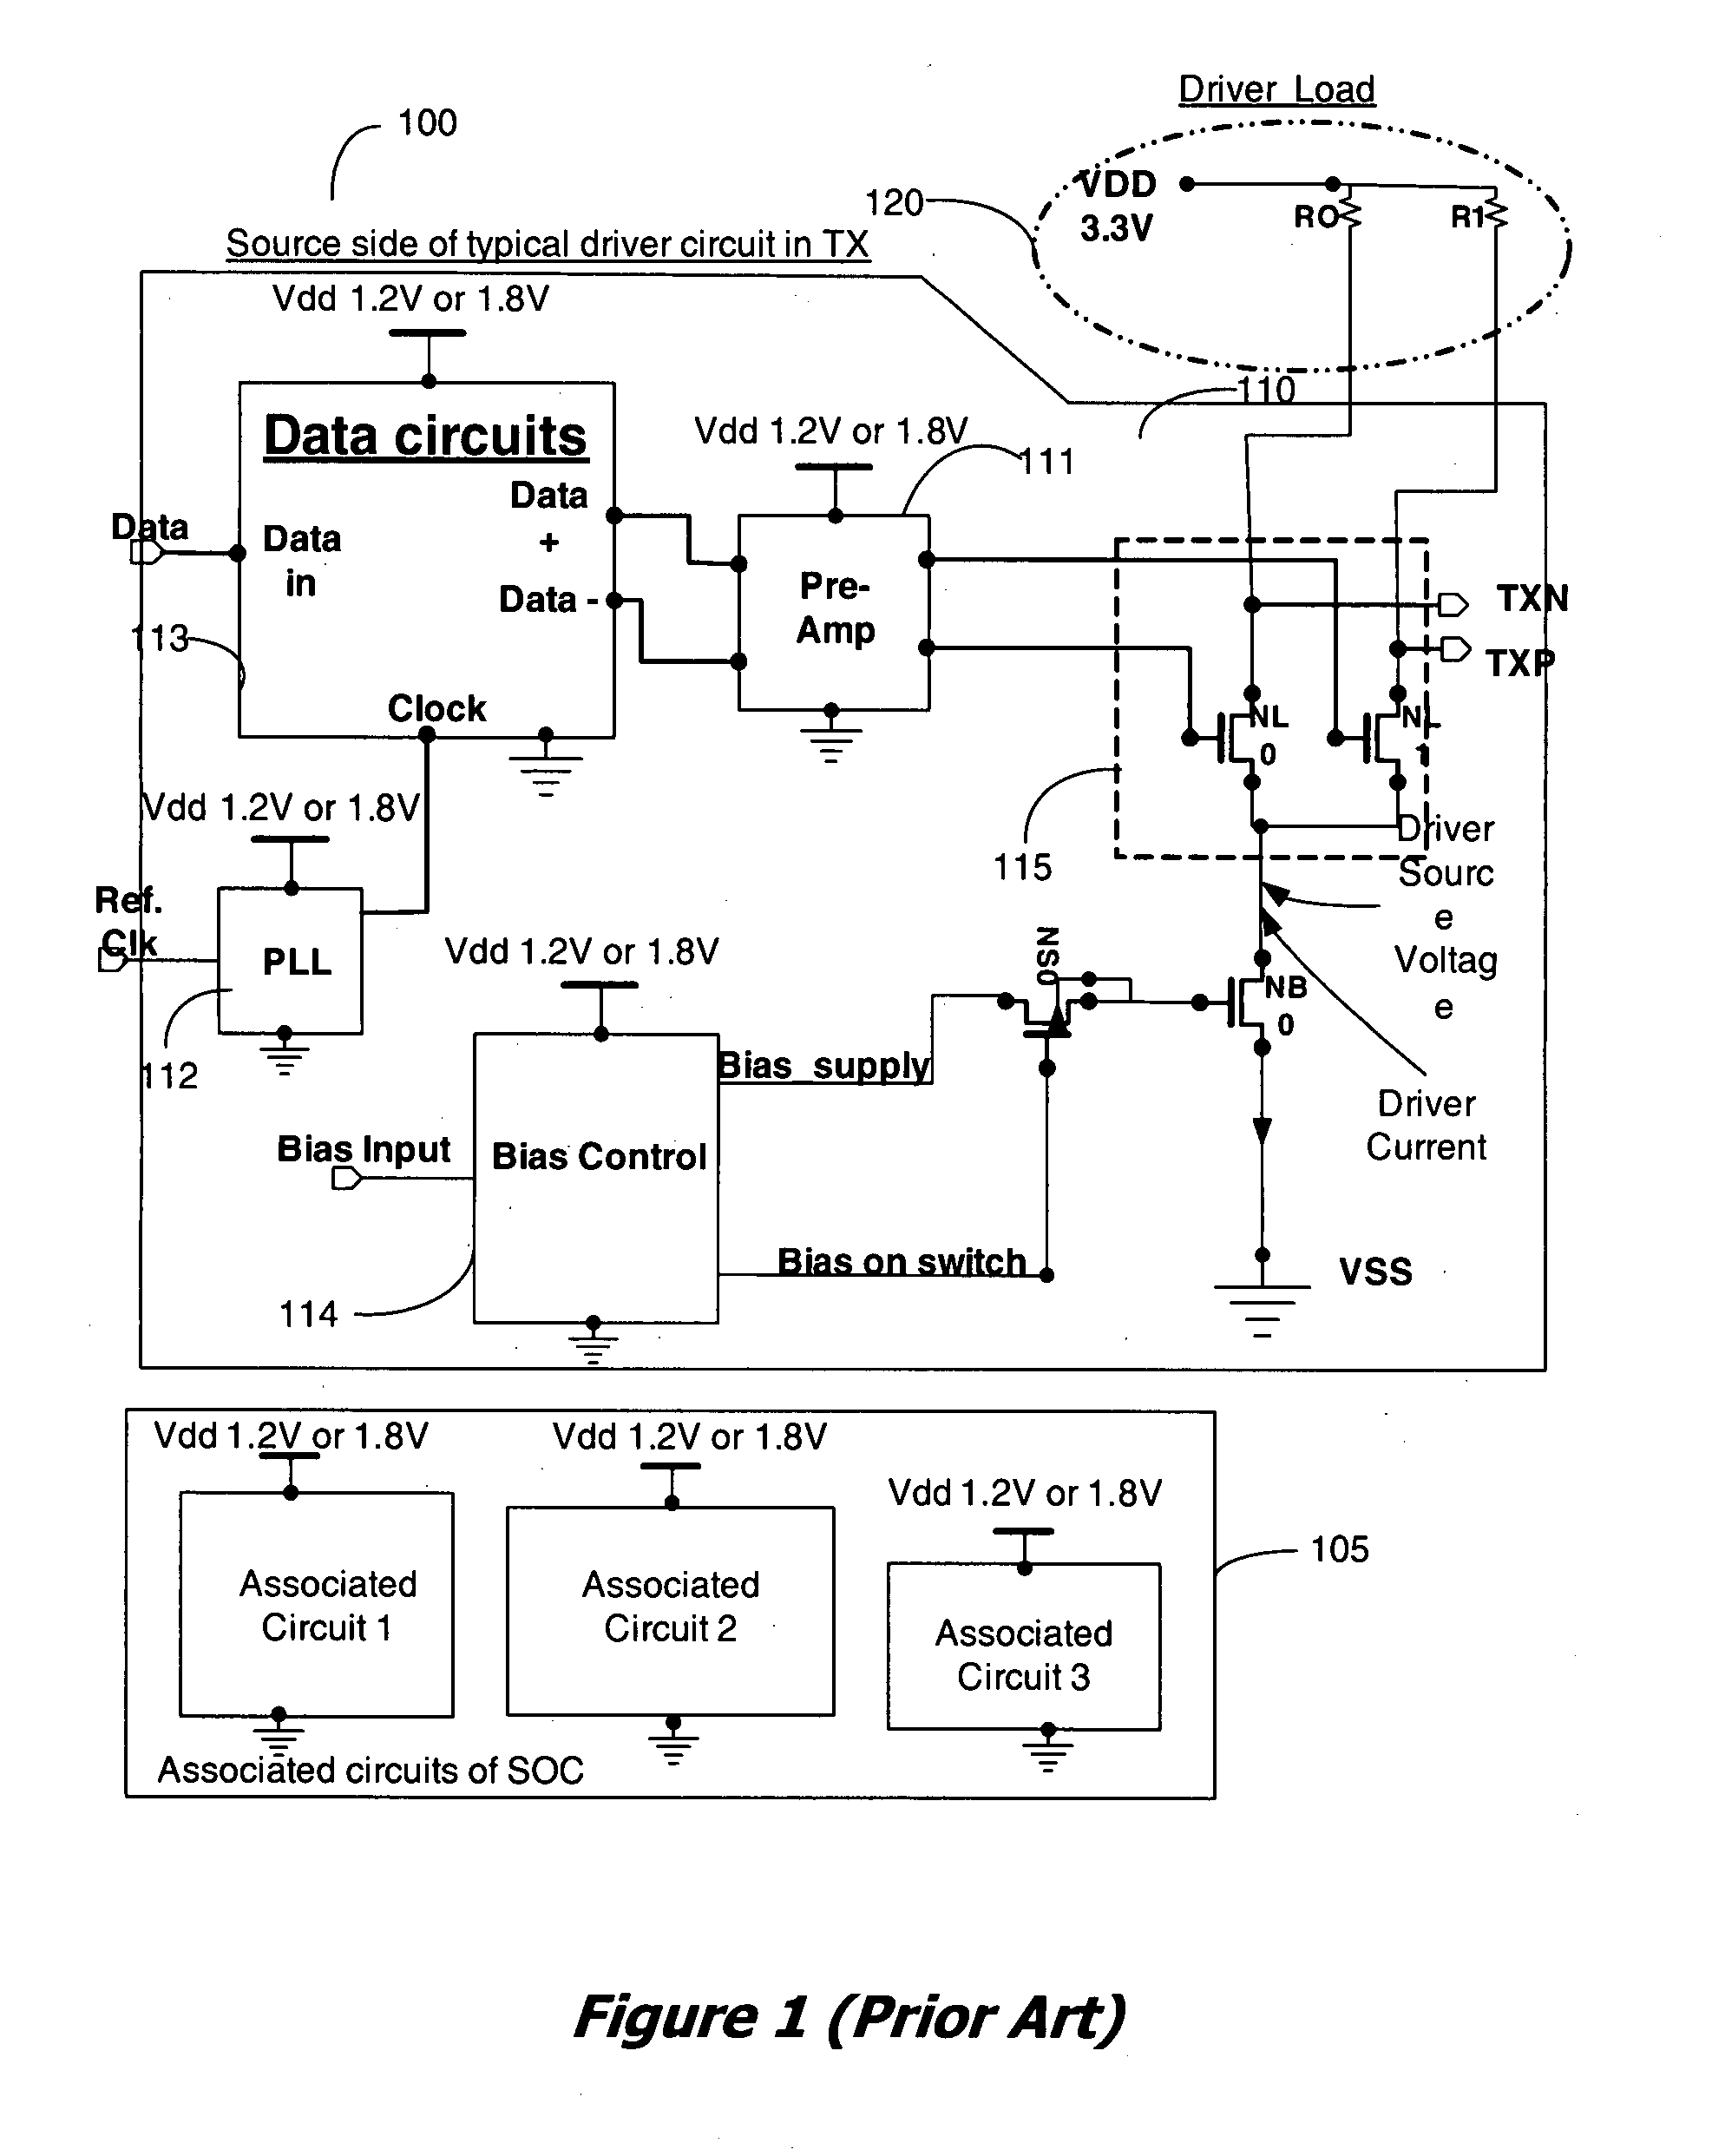 Apparatus and method for recovery of wasted power from differential drivers